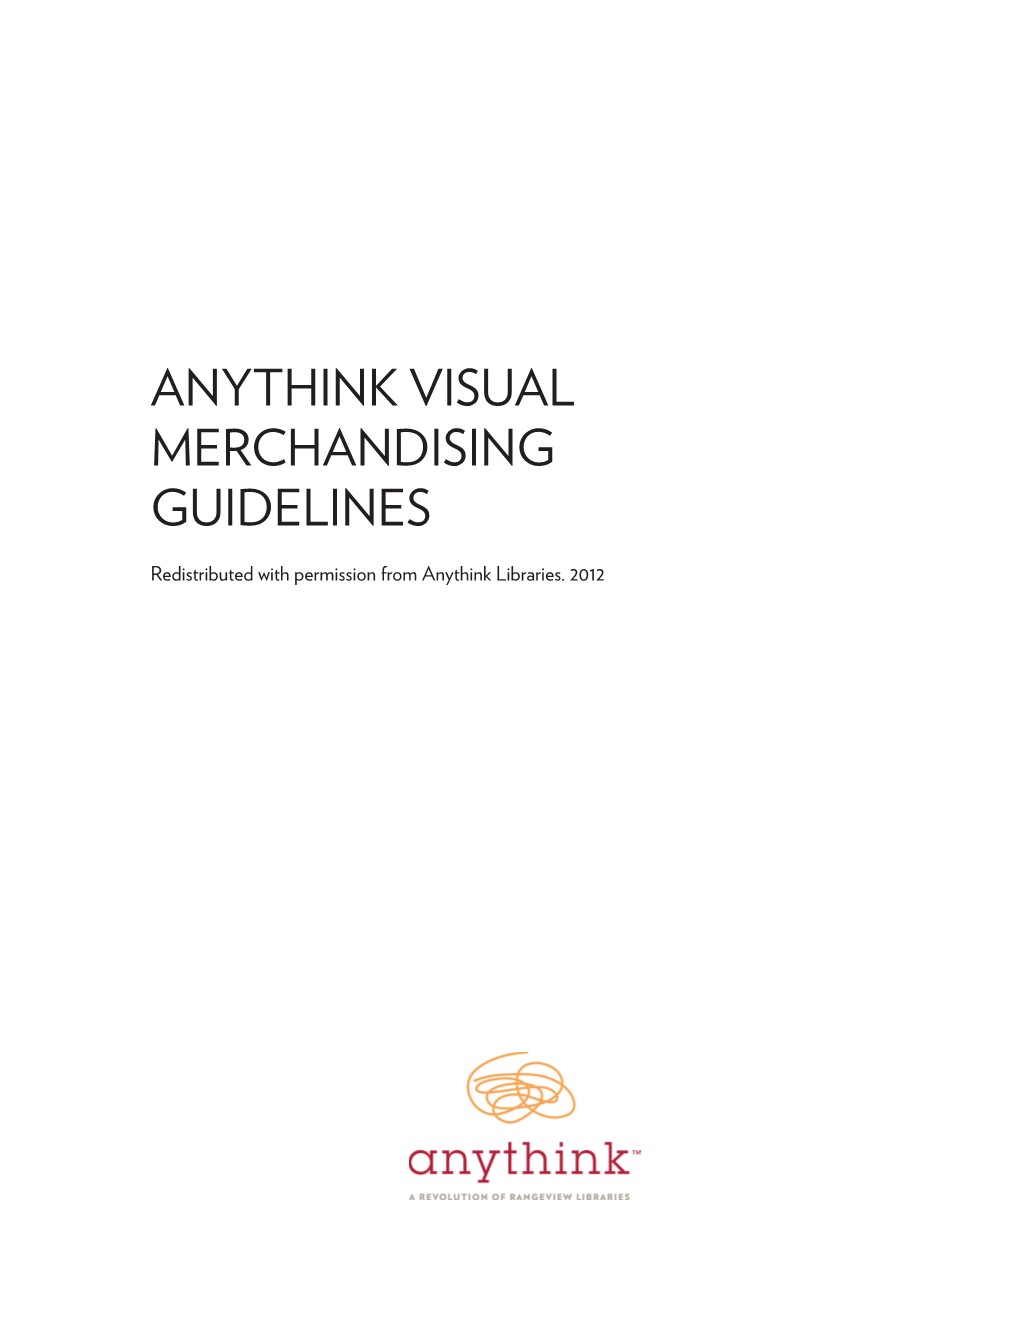 Anythink Visual Merchandising Guidelines